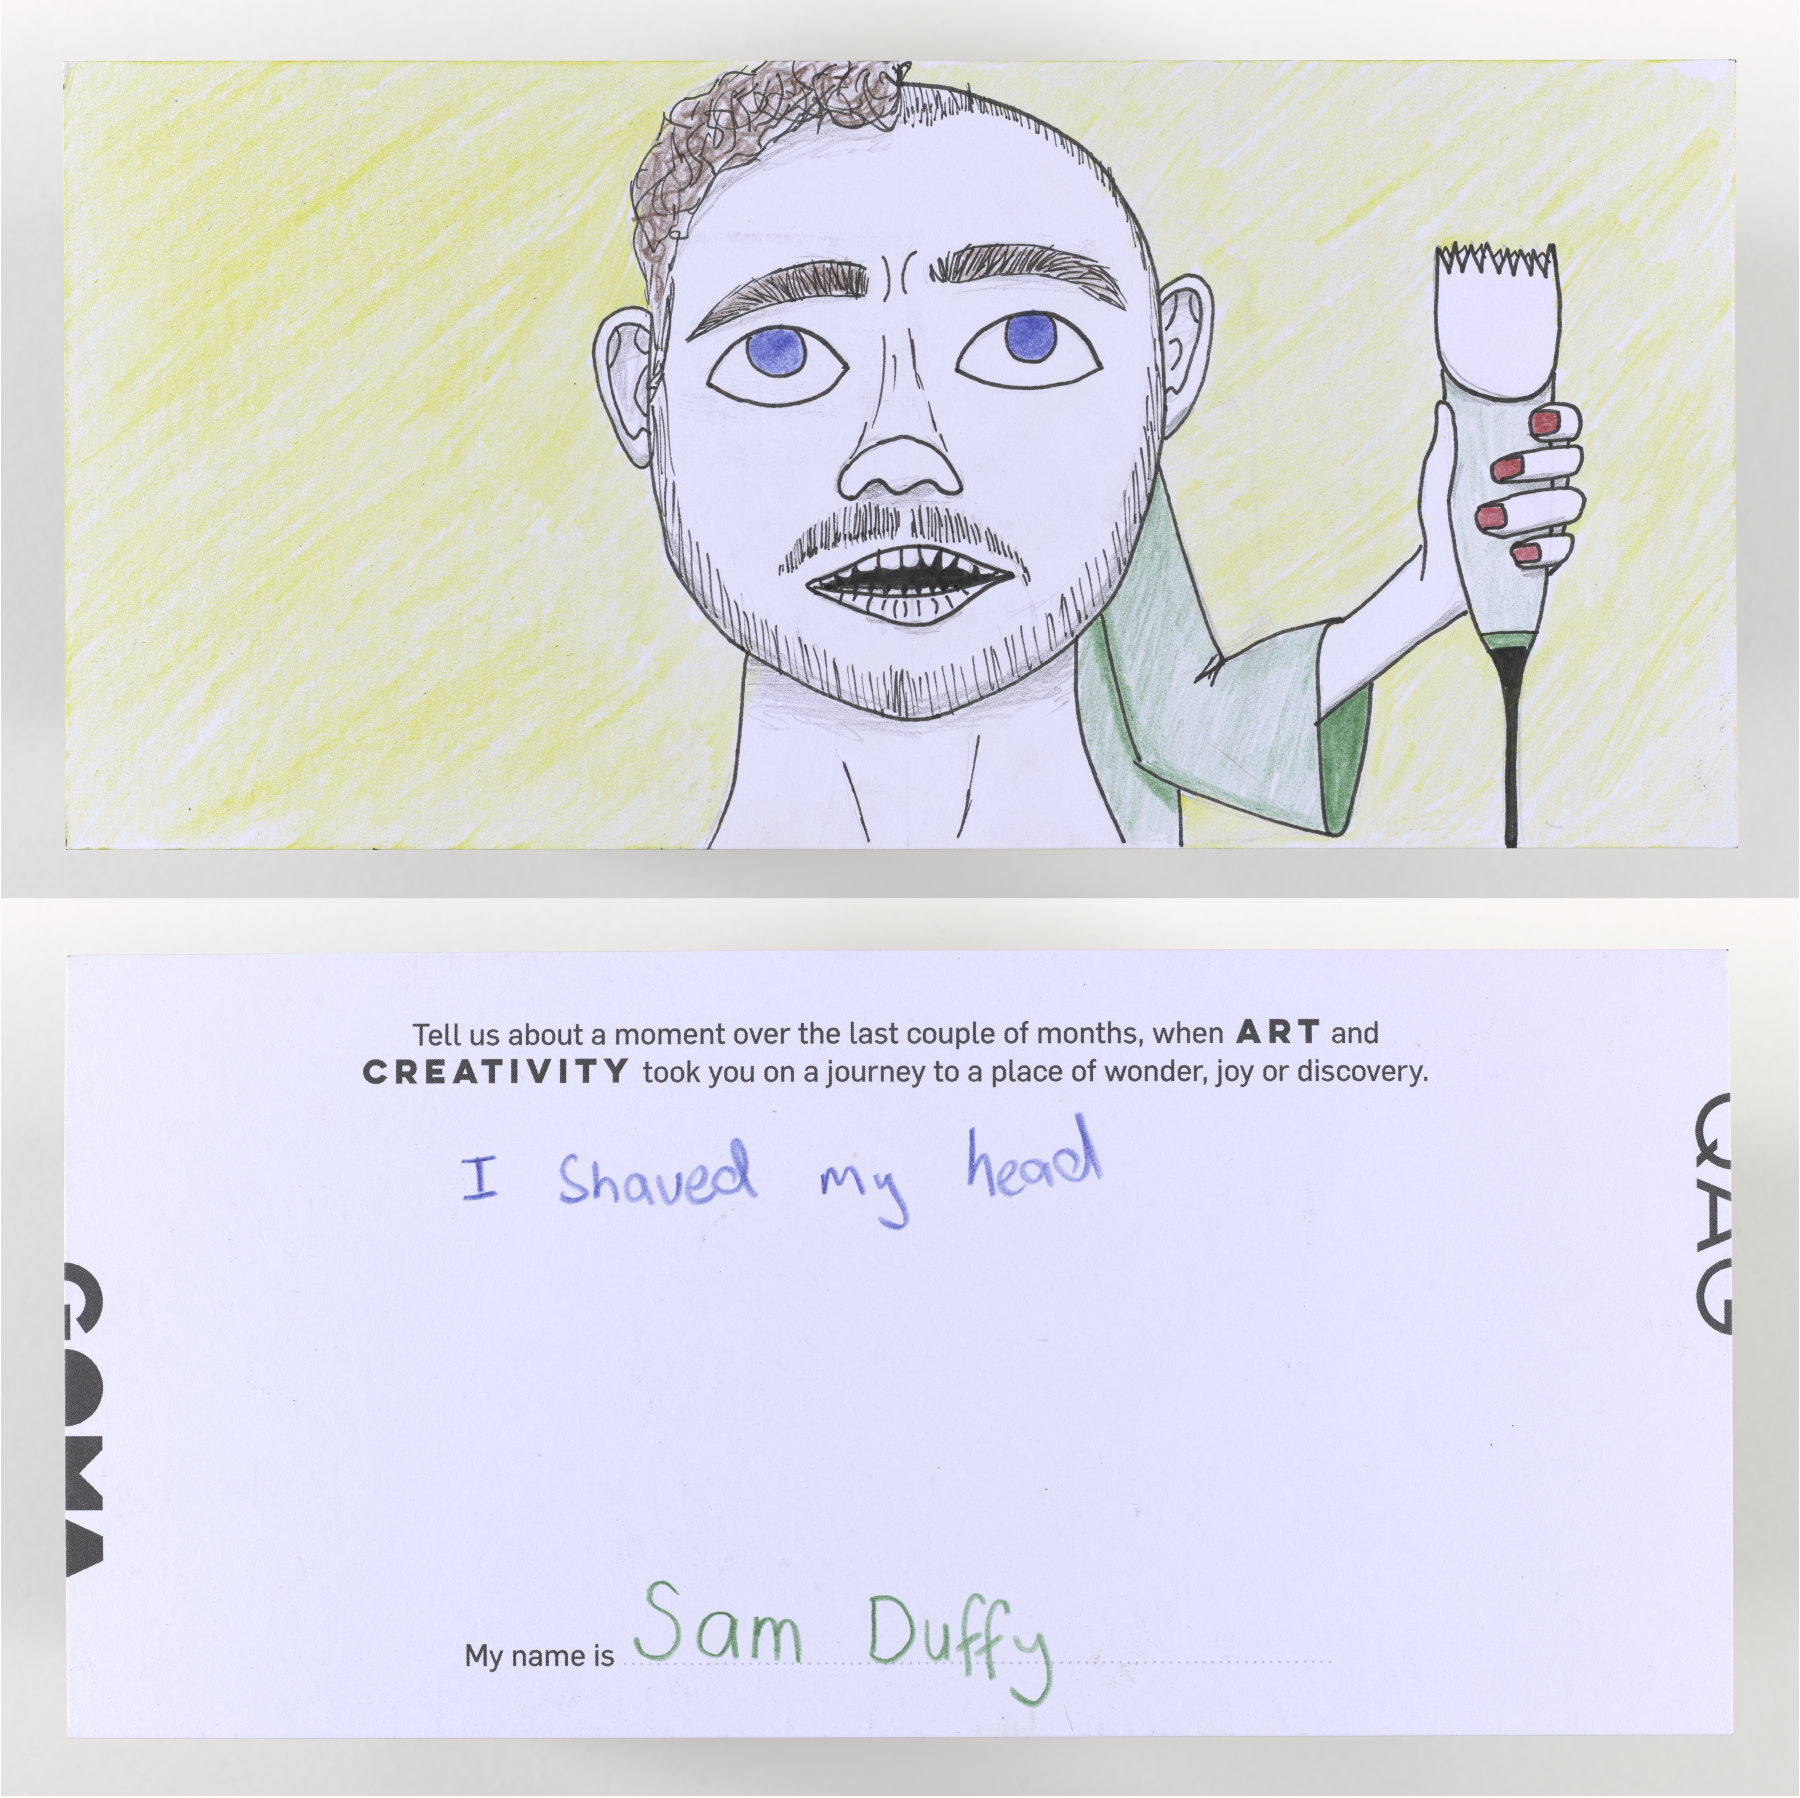 Generated image of the artwork: Sam Duffy